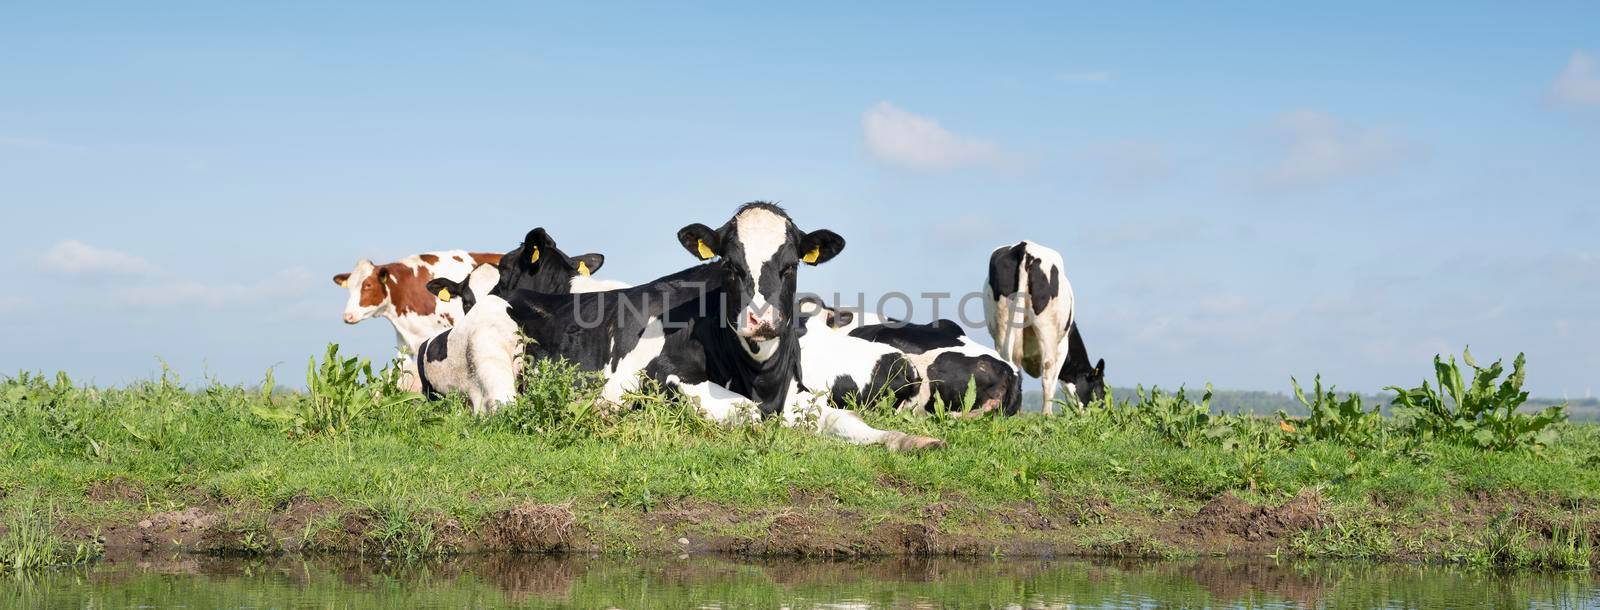 young spotted cows in dutch meadow near amersfoort in holland behind canal under blue sky in spring